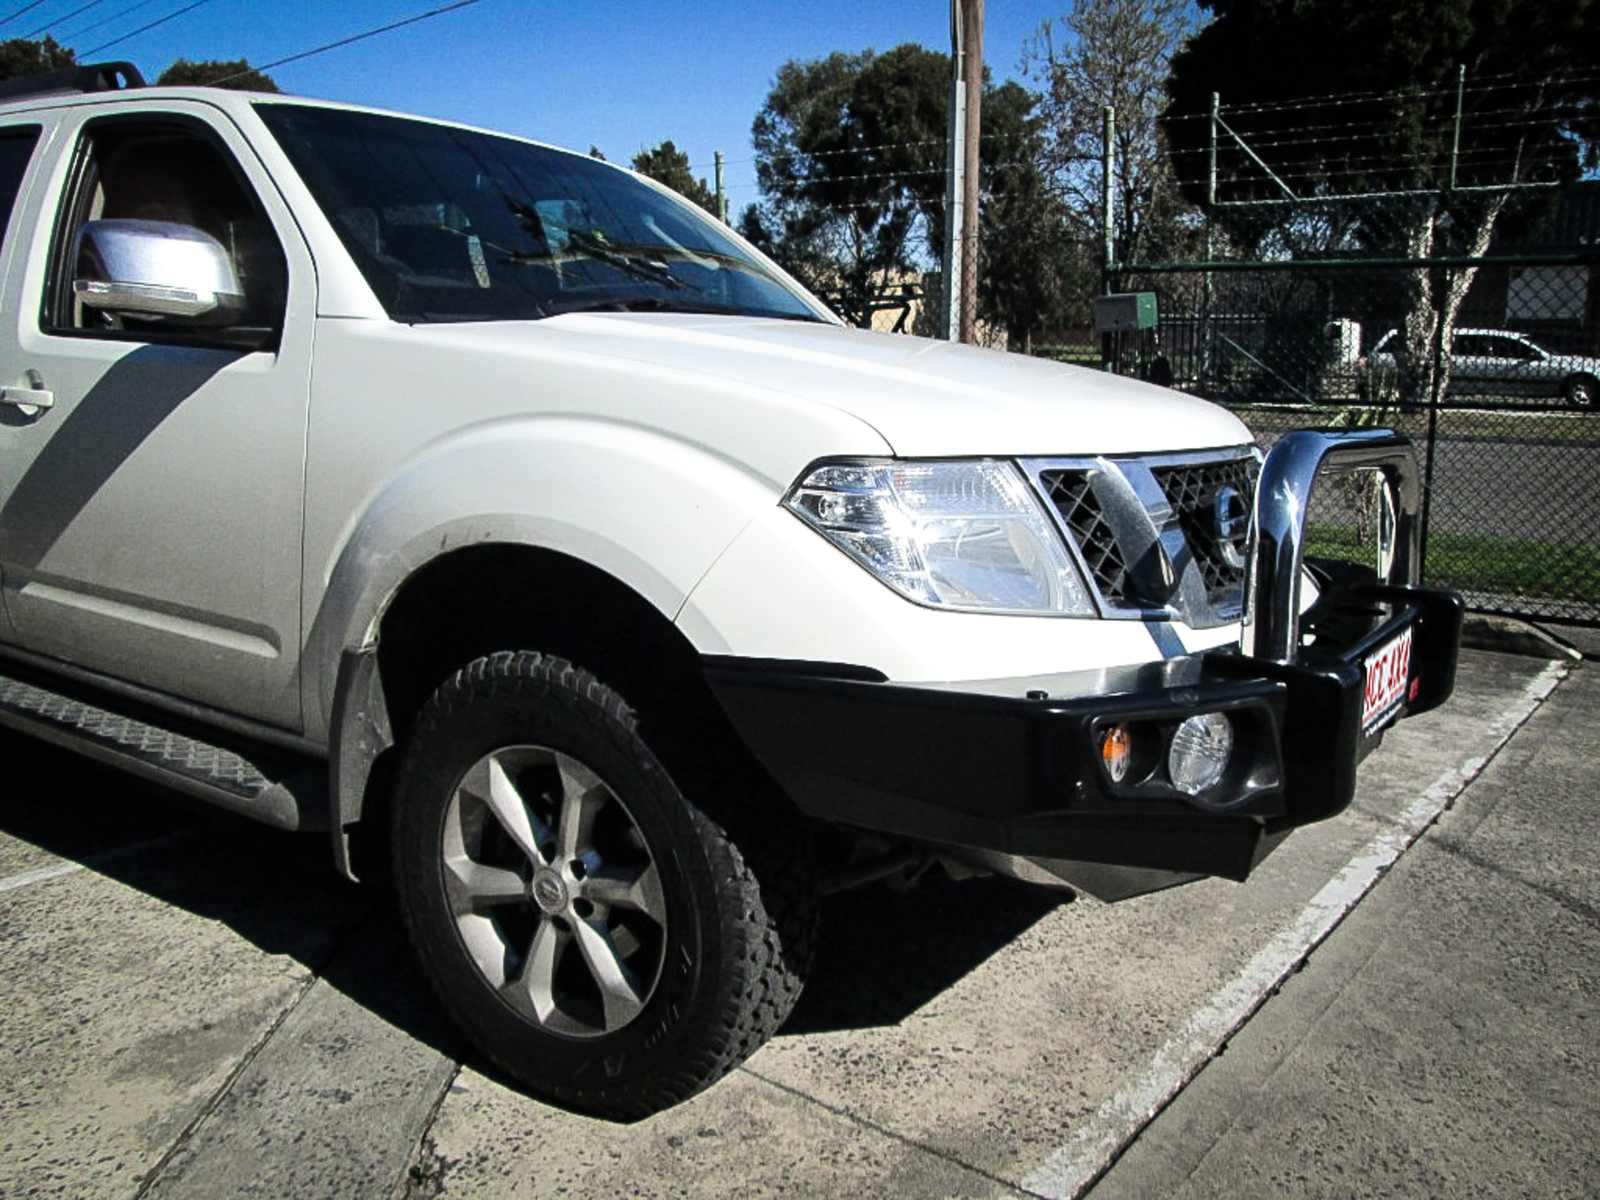 MCC FALCON STAINLESS SINGLE LOOP W/ FOGS AND PLATES TO SUIT NISSAN NAVARA D40 2011-2014 (AFRICA, SPAIN STX) & PATHFINDER R51 11-13 (SMOOTH)